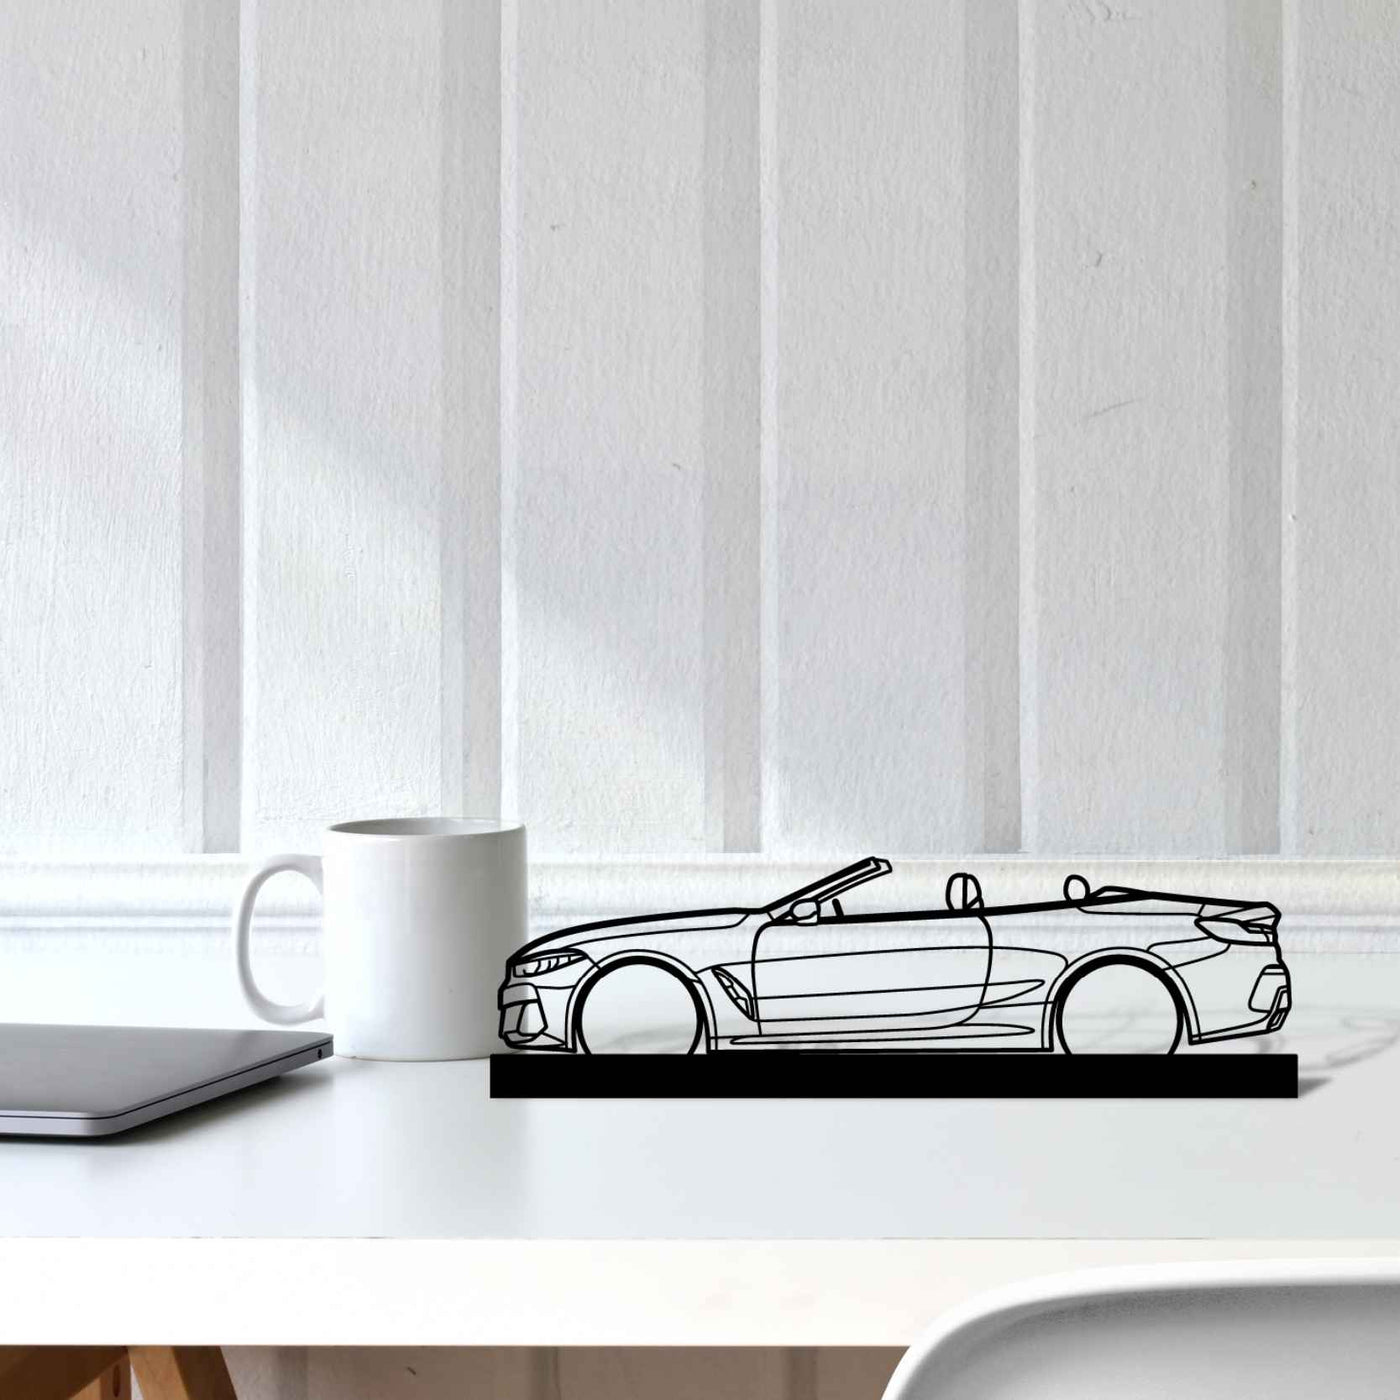 M850i Convertible Silhouette Metal Art Stand